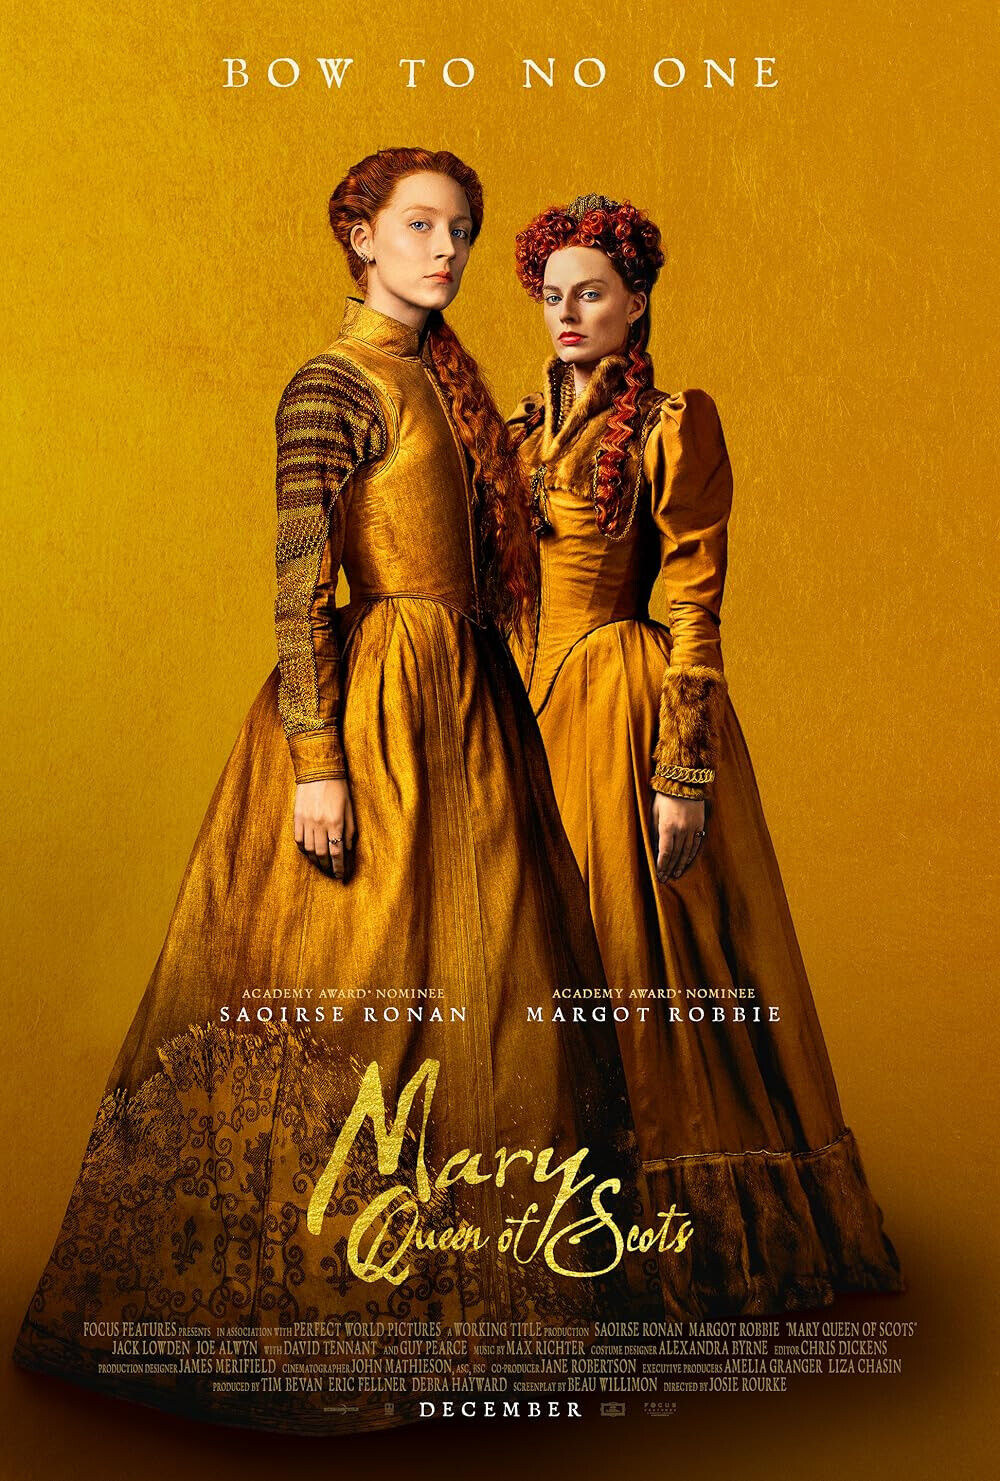 Mary Queen of Scots (2018) Movie DVd Box Set New